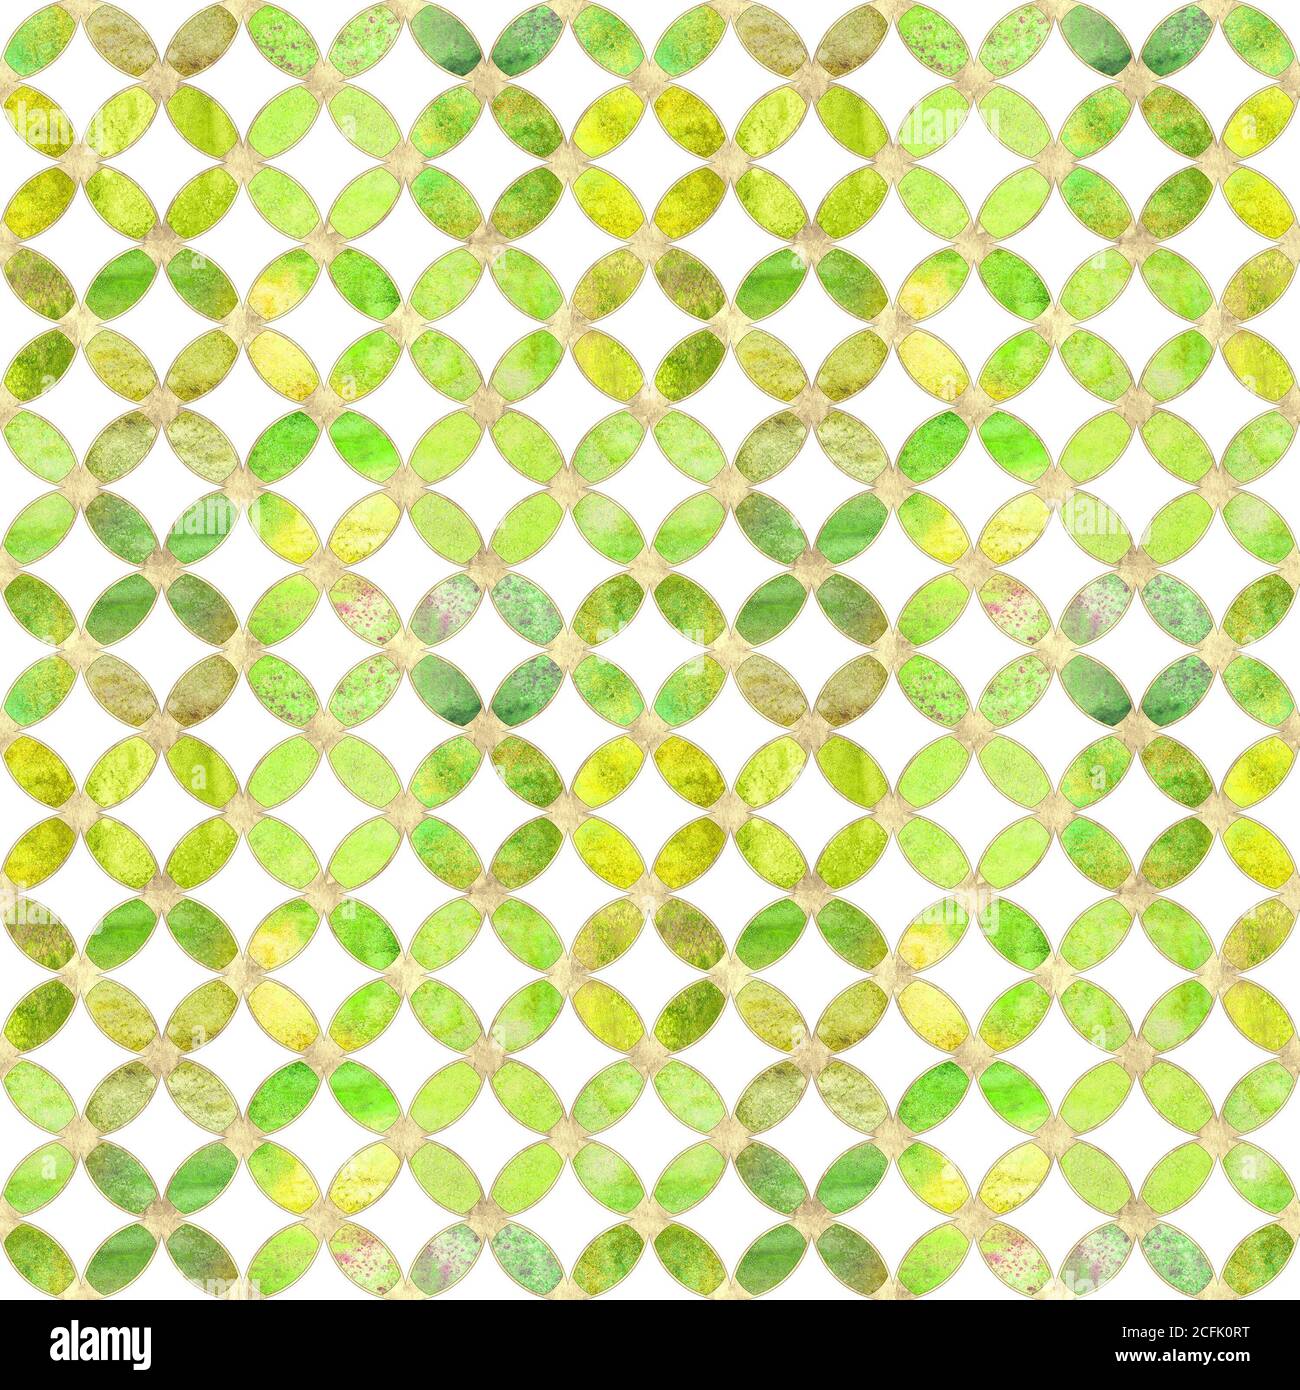 Seamless watercolour grunge yellow green gold glitter abstract texture. Watercolor hand drawn background with overlapping circles and golden contour p Stock Photo